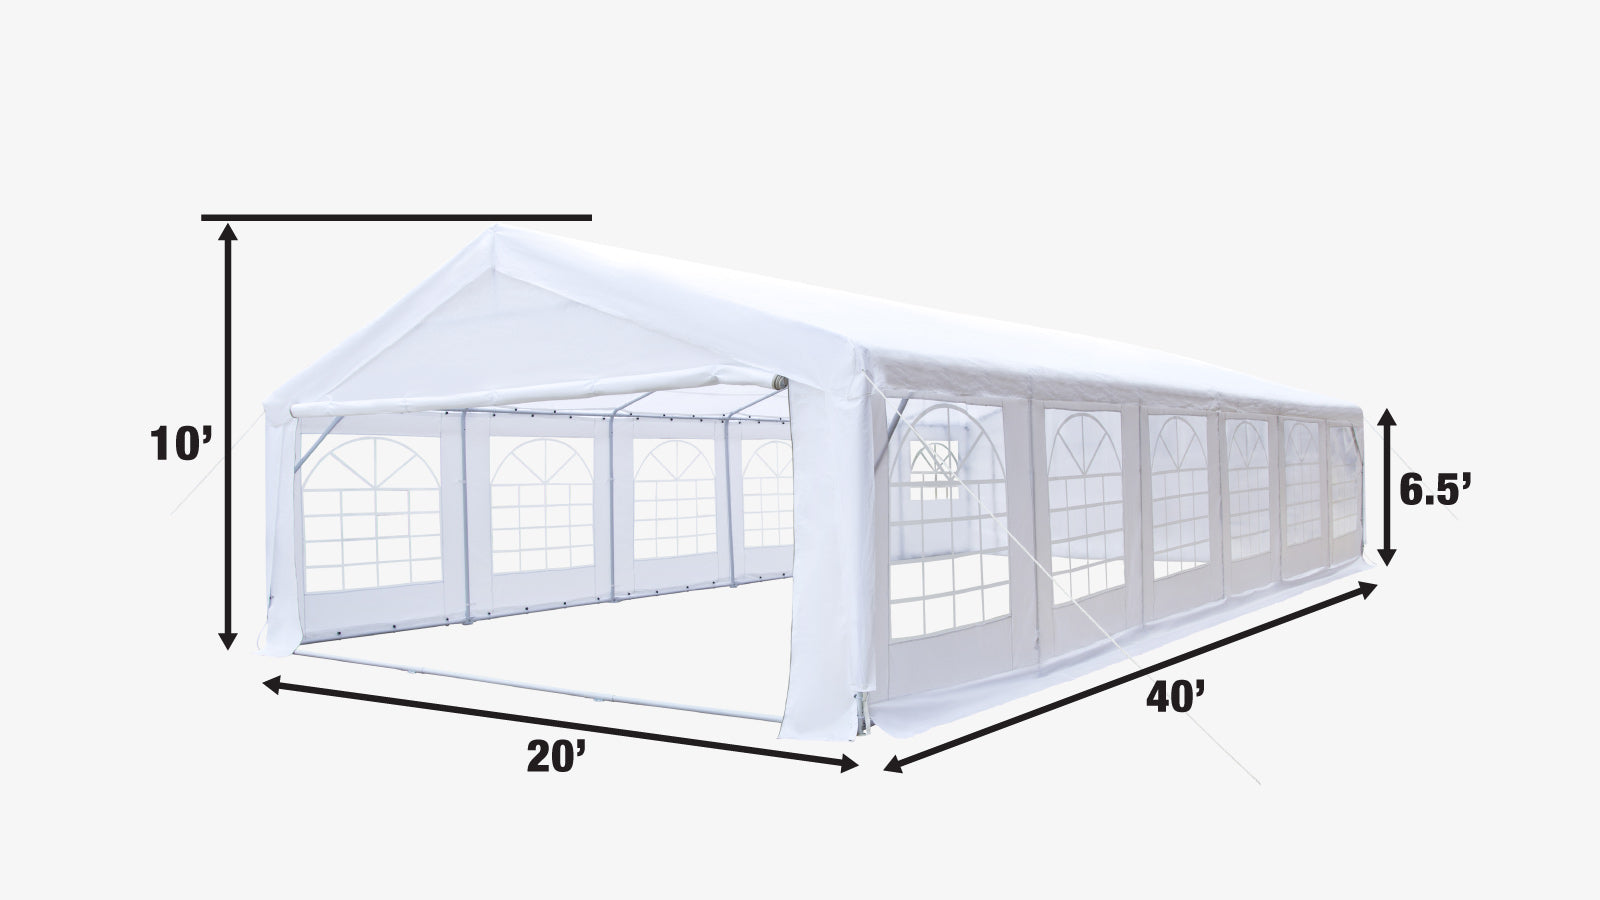 TMG Industrial 20' x 40' Heavy Duty Outdoor Party Tent with Removable Sidewalls and Roll-Up Doors, 11 oz PE Cover, 6’6” Overhead, 10’ Peak Ceiling, TMG-PT2040F-specifications-image